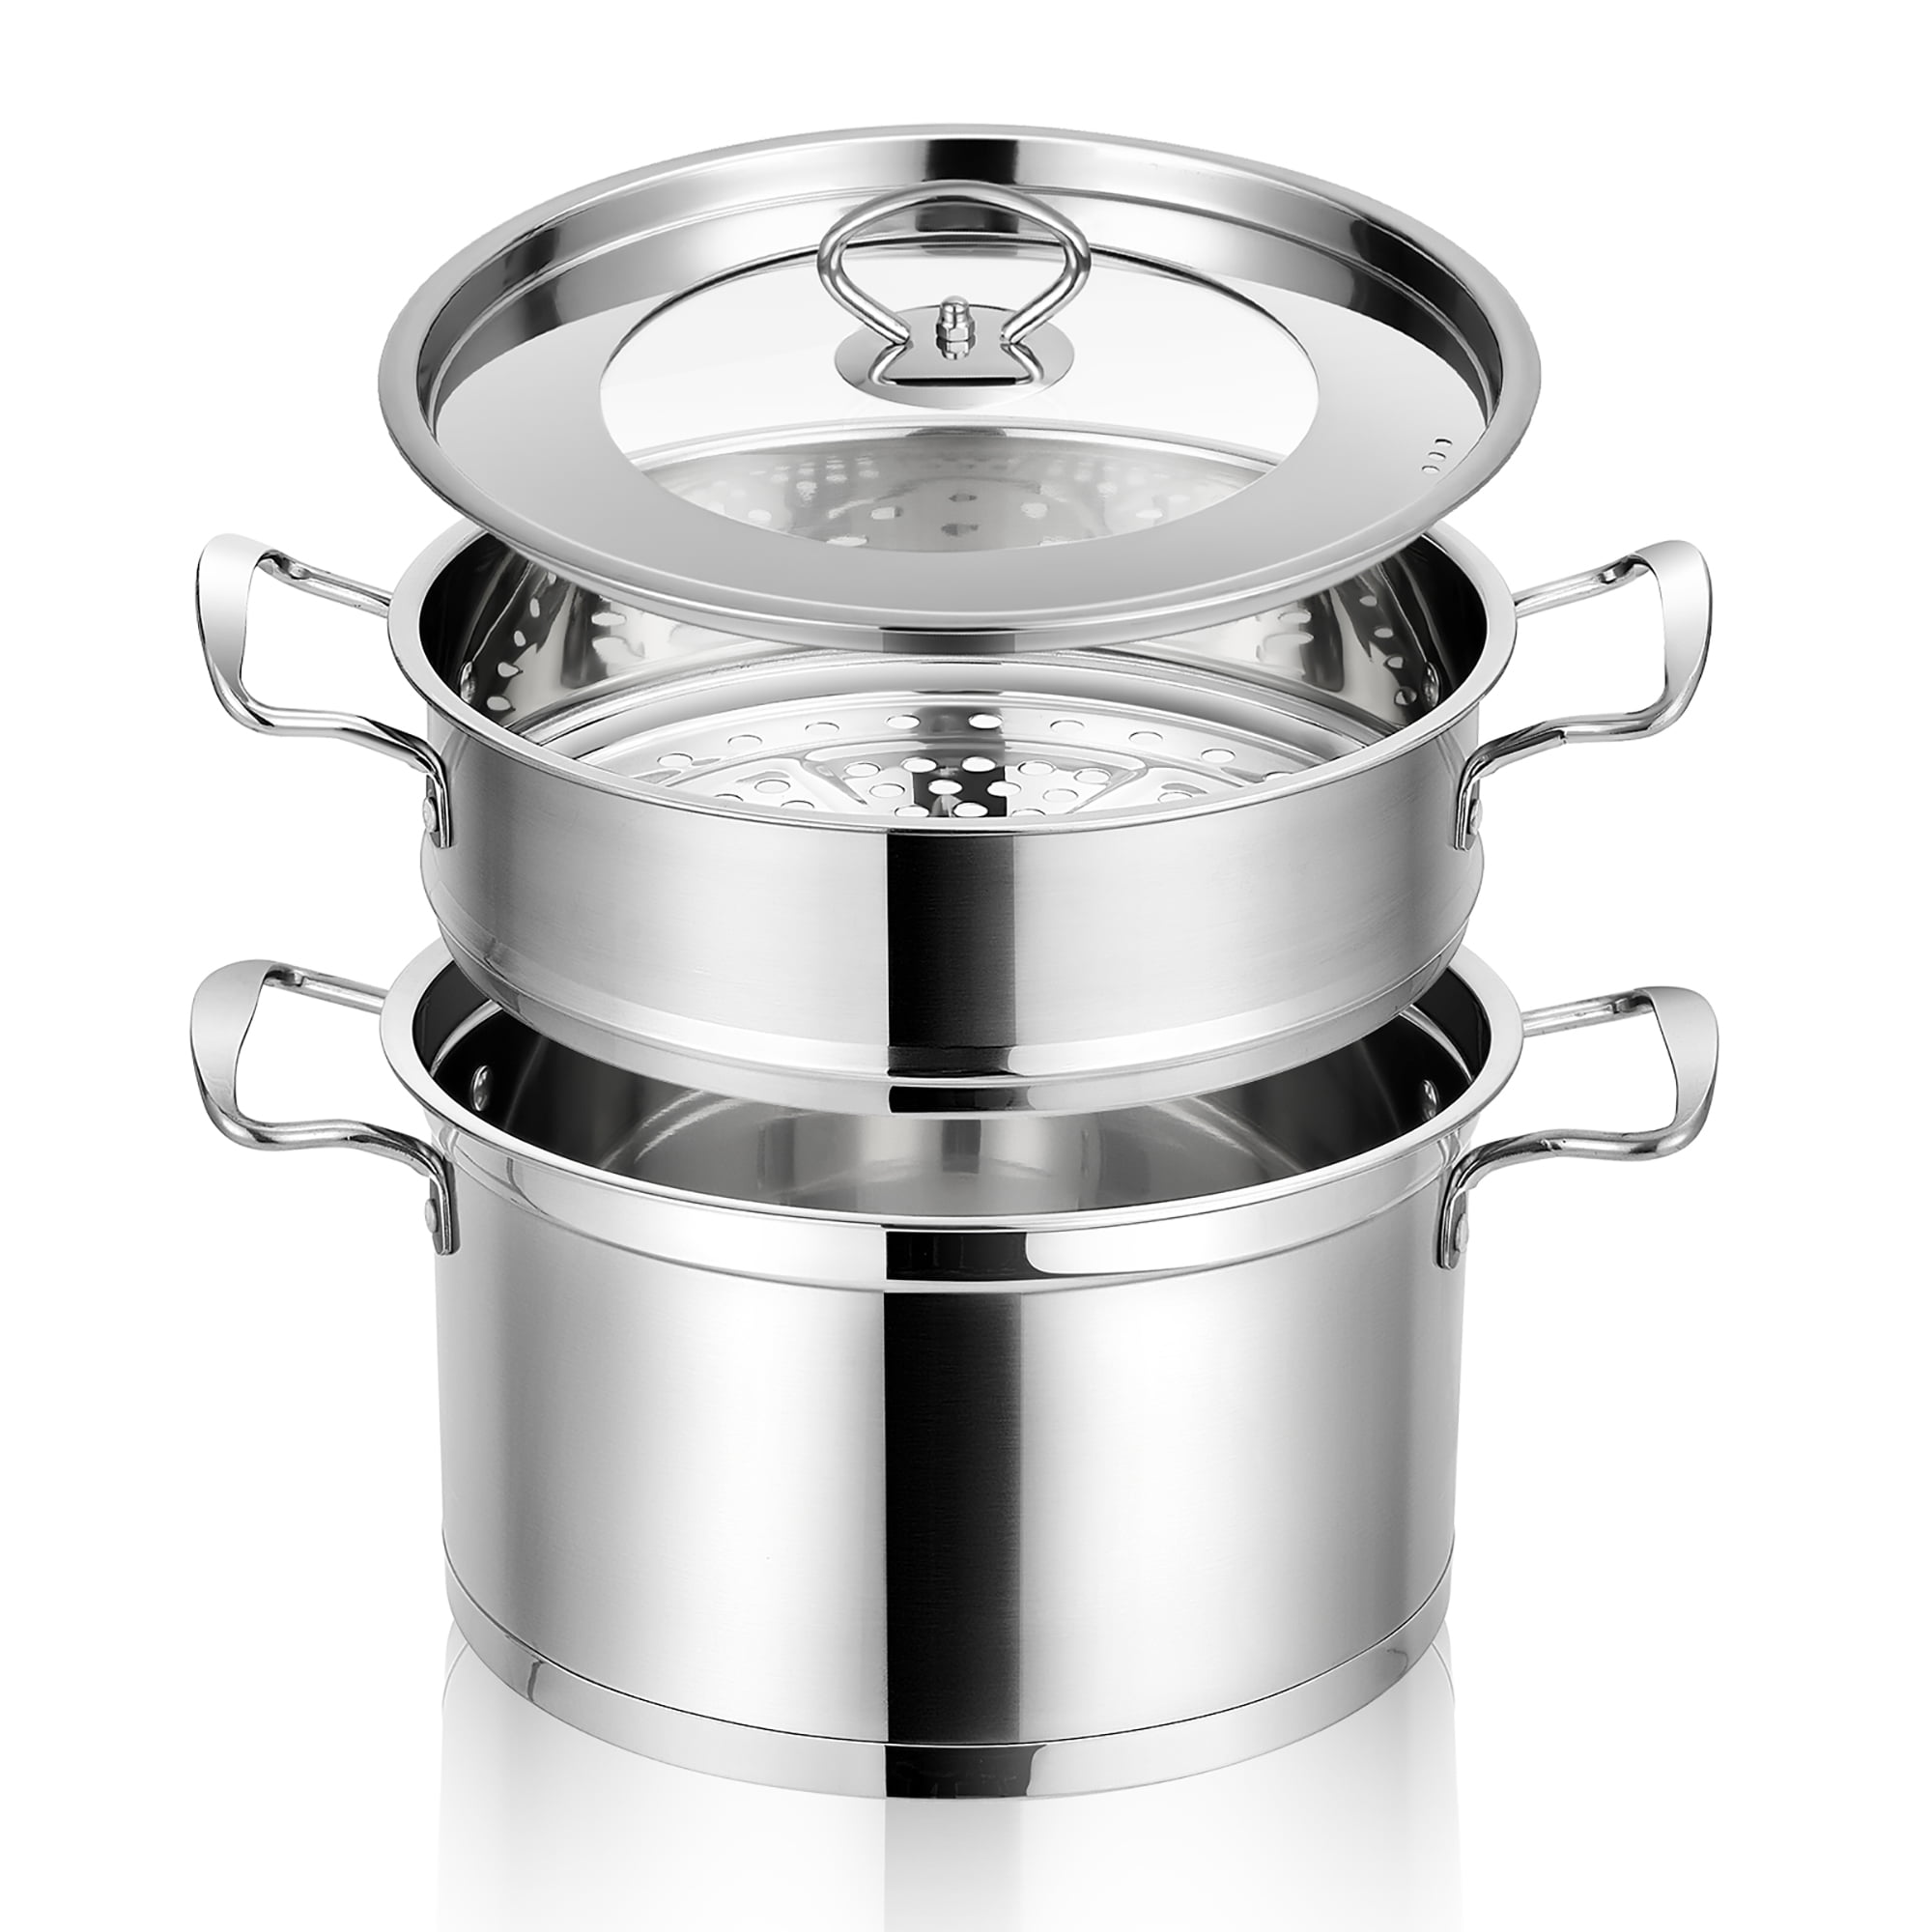 Mano Steam Pots for Cooking 11 inch Steamer Pot with Lid 2-Tier Multipurpose Stainless Steel Steaming Pot Cookware with Handle for Vegetable, Dumpling